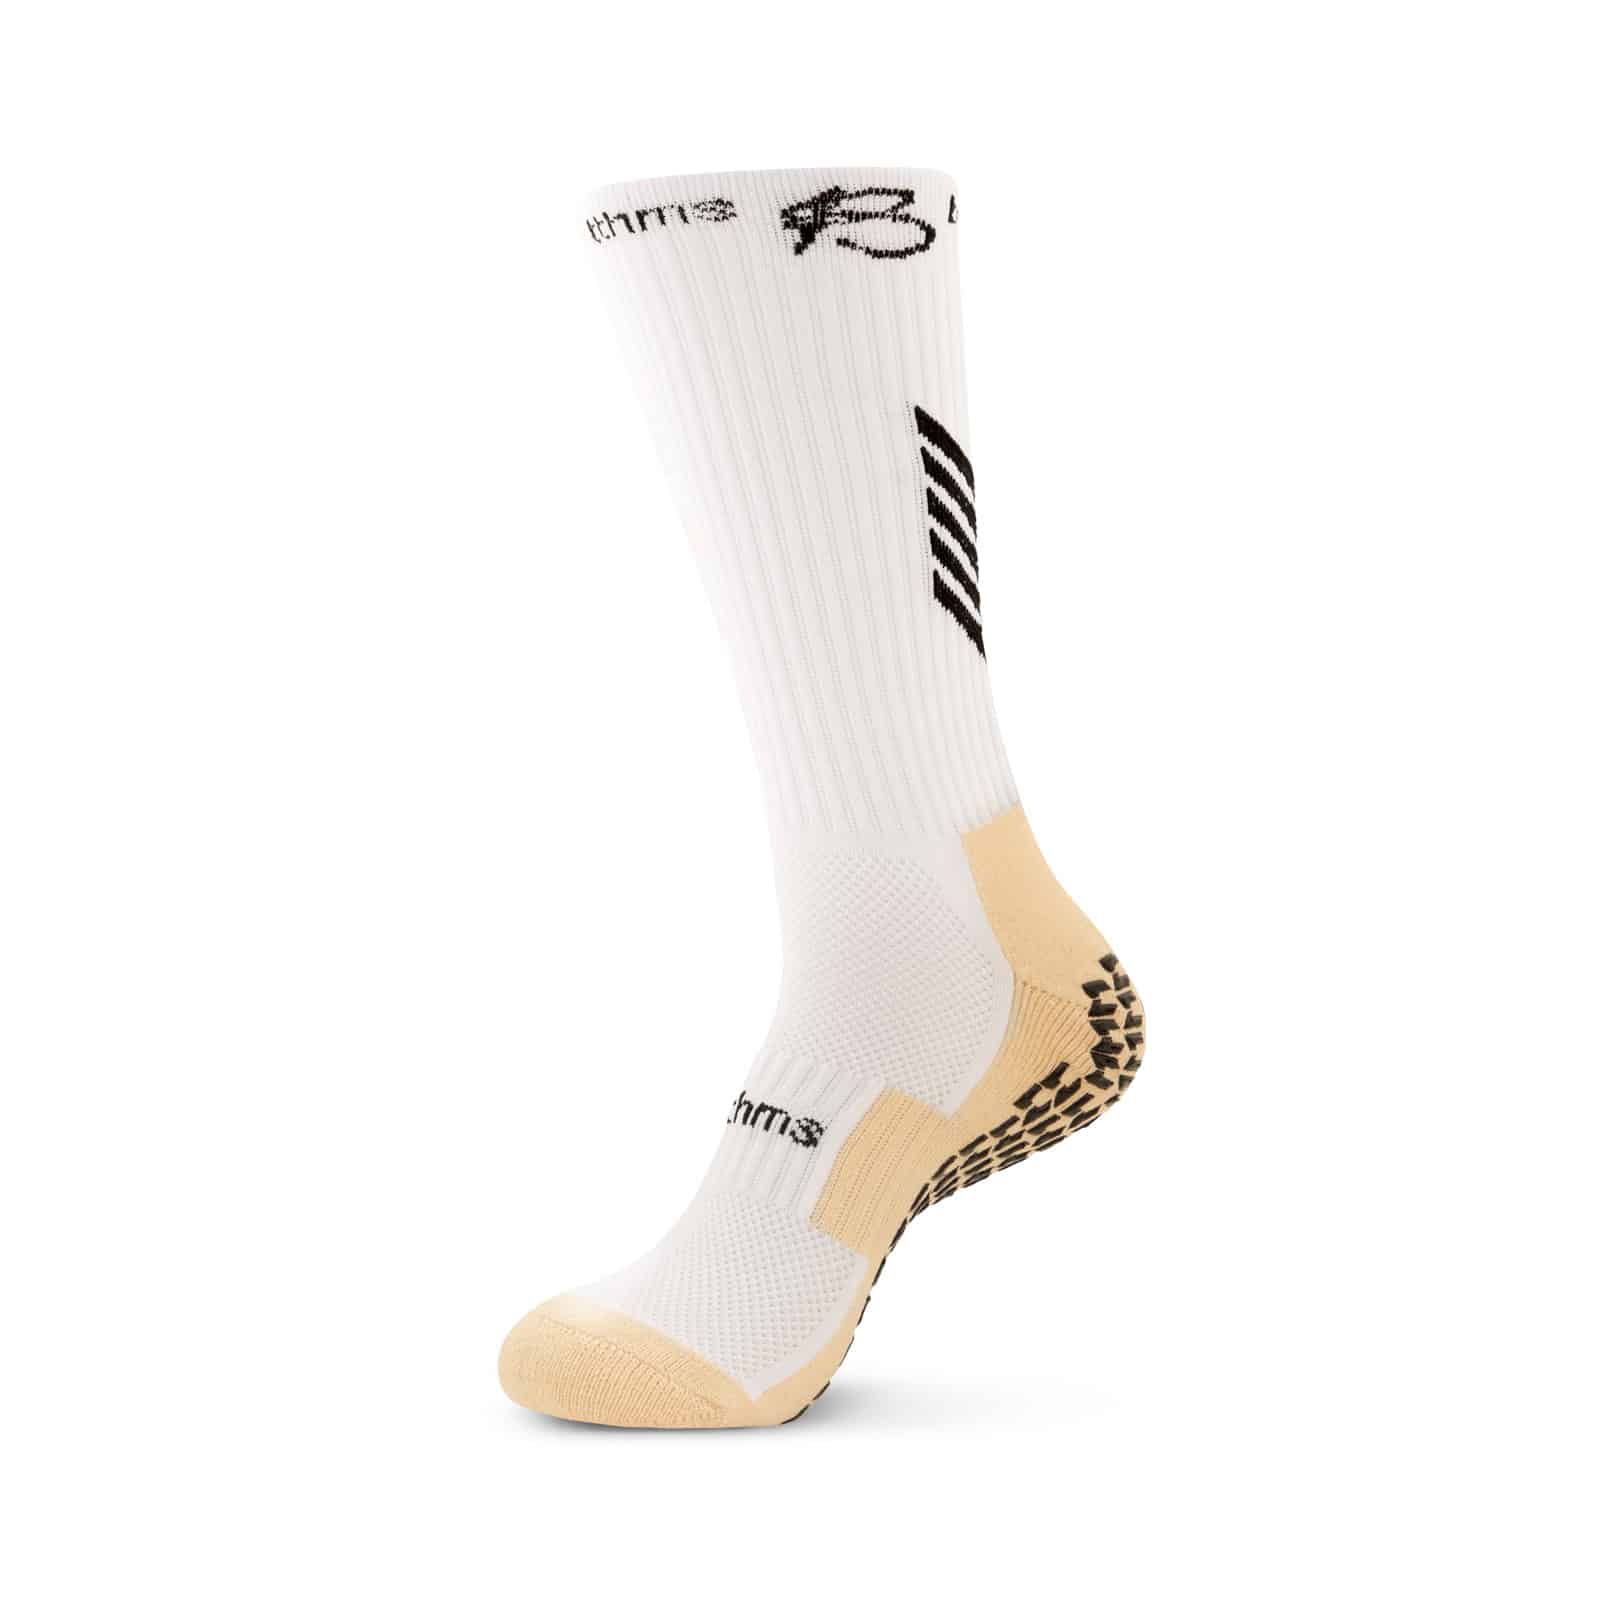 products/BTTHMS_TECH_SOCK3069_White.jpgproducts/BTTHMS_TECH_SOCK3062_White.jpgproducts/BTTHMS_TECH_SOCK3070_White.jpgproducts/BTTHMS_TECH_SOCK3069_Detail_White.jpgproducts/BTTHMS_TECH_SOCK3062_Detail_White.jpg